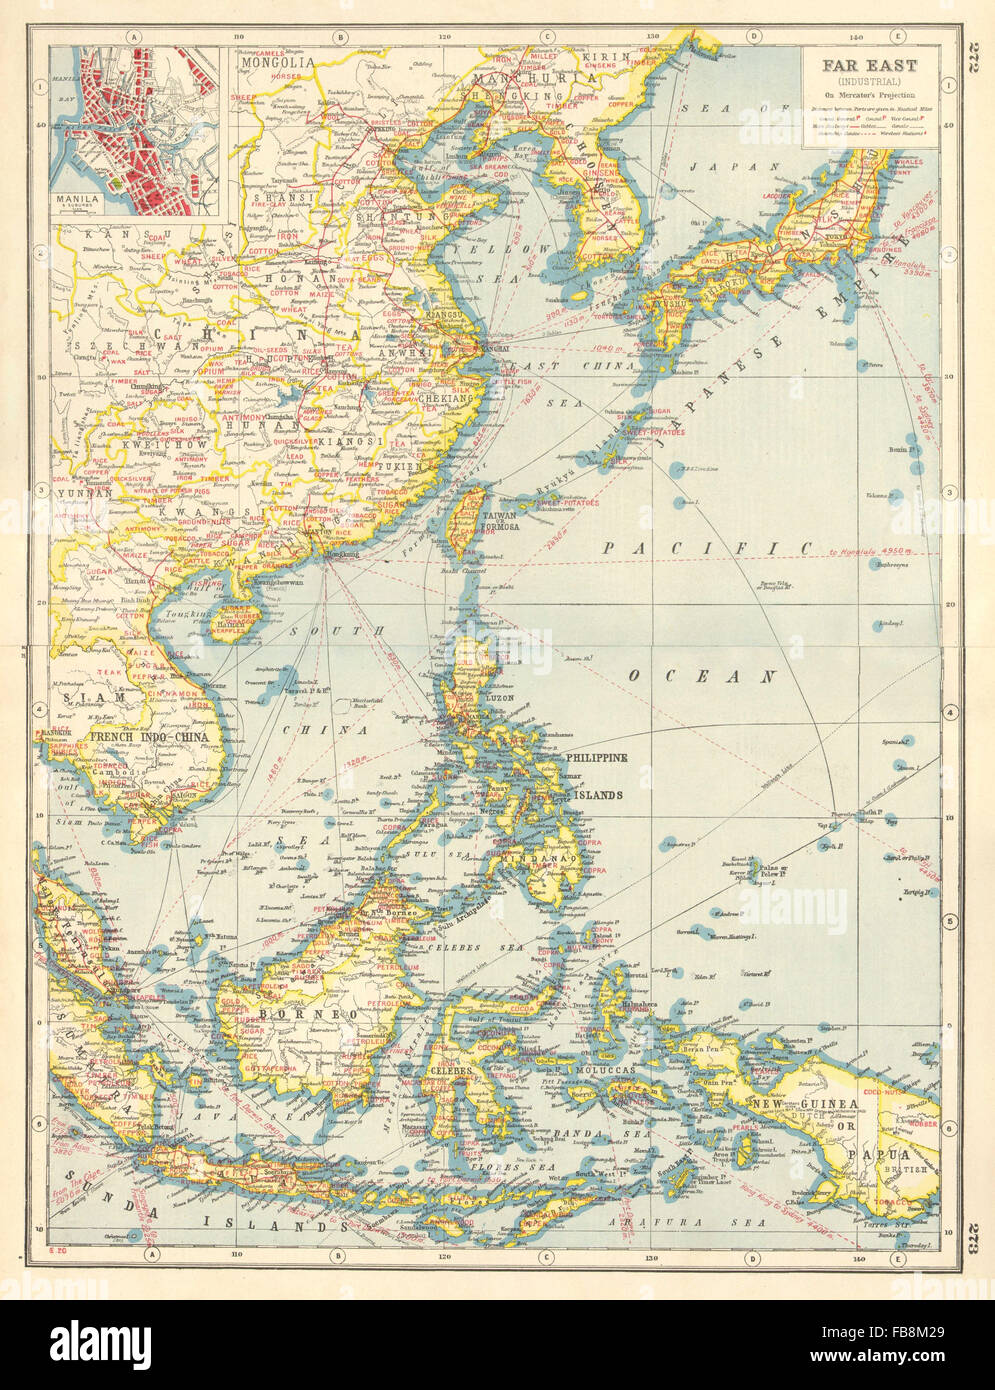 EAST ASIA INDUSTRIES: China Korea East Indies Philippines. Manila plan, 1920 map Stock Photo